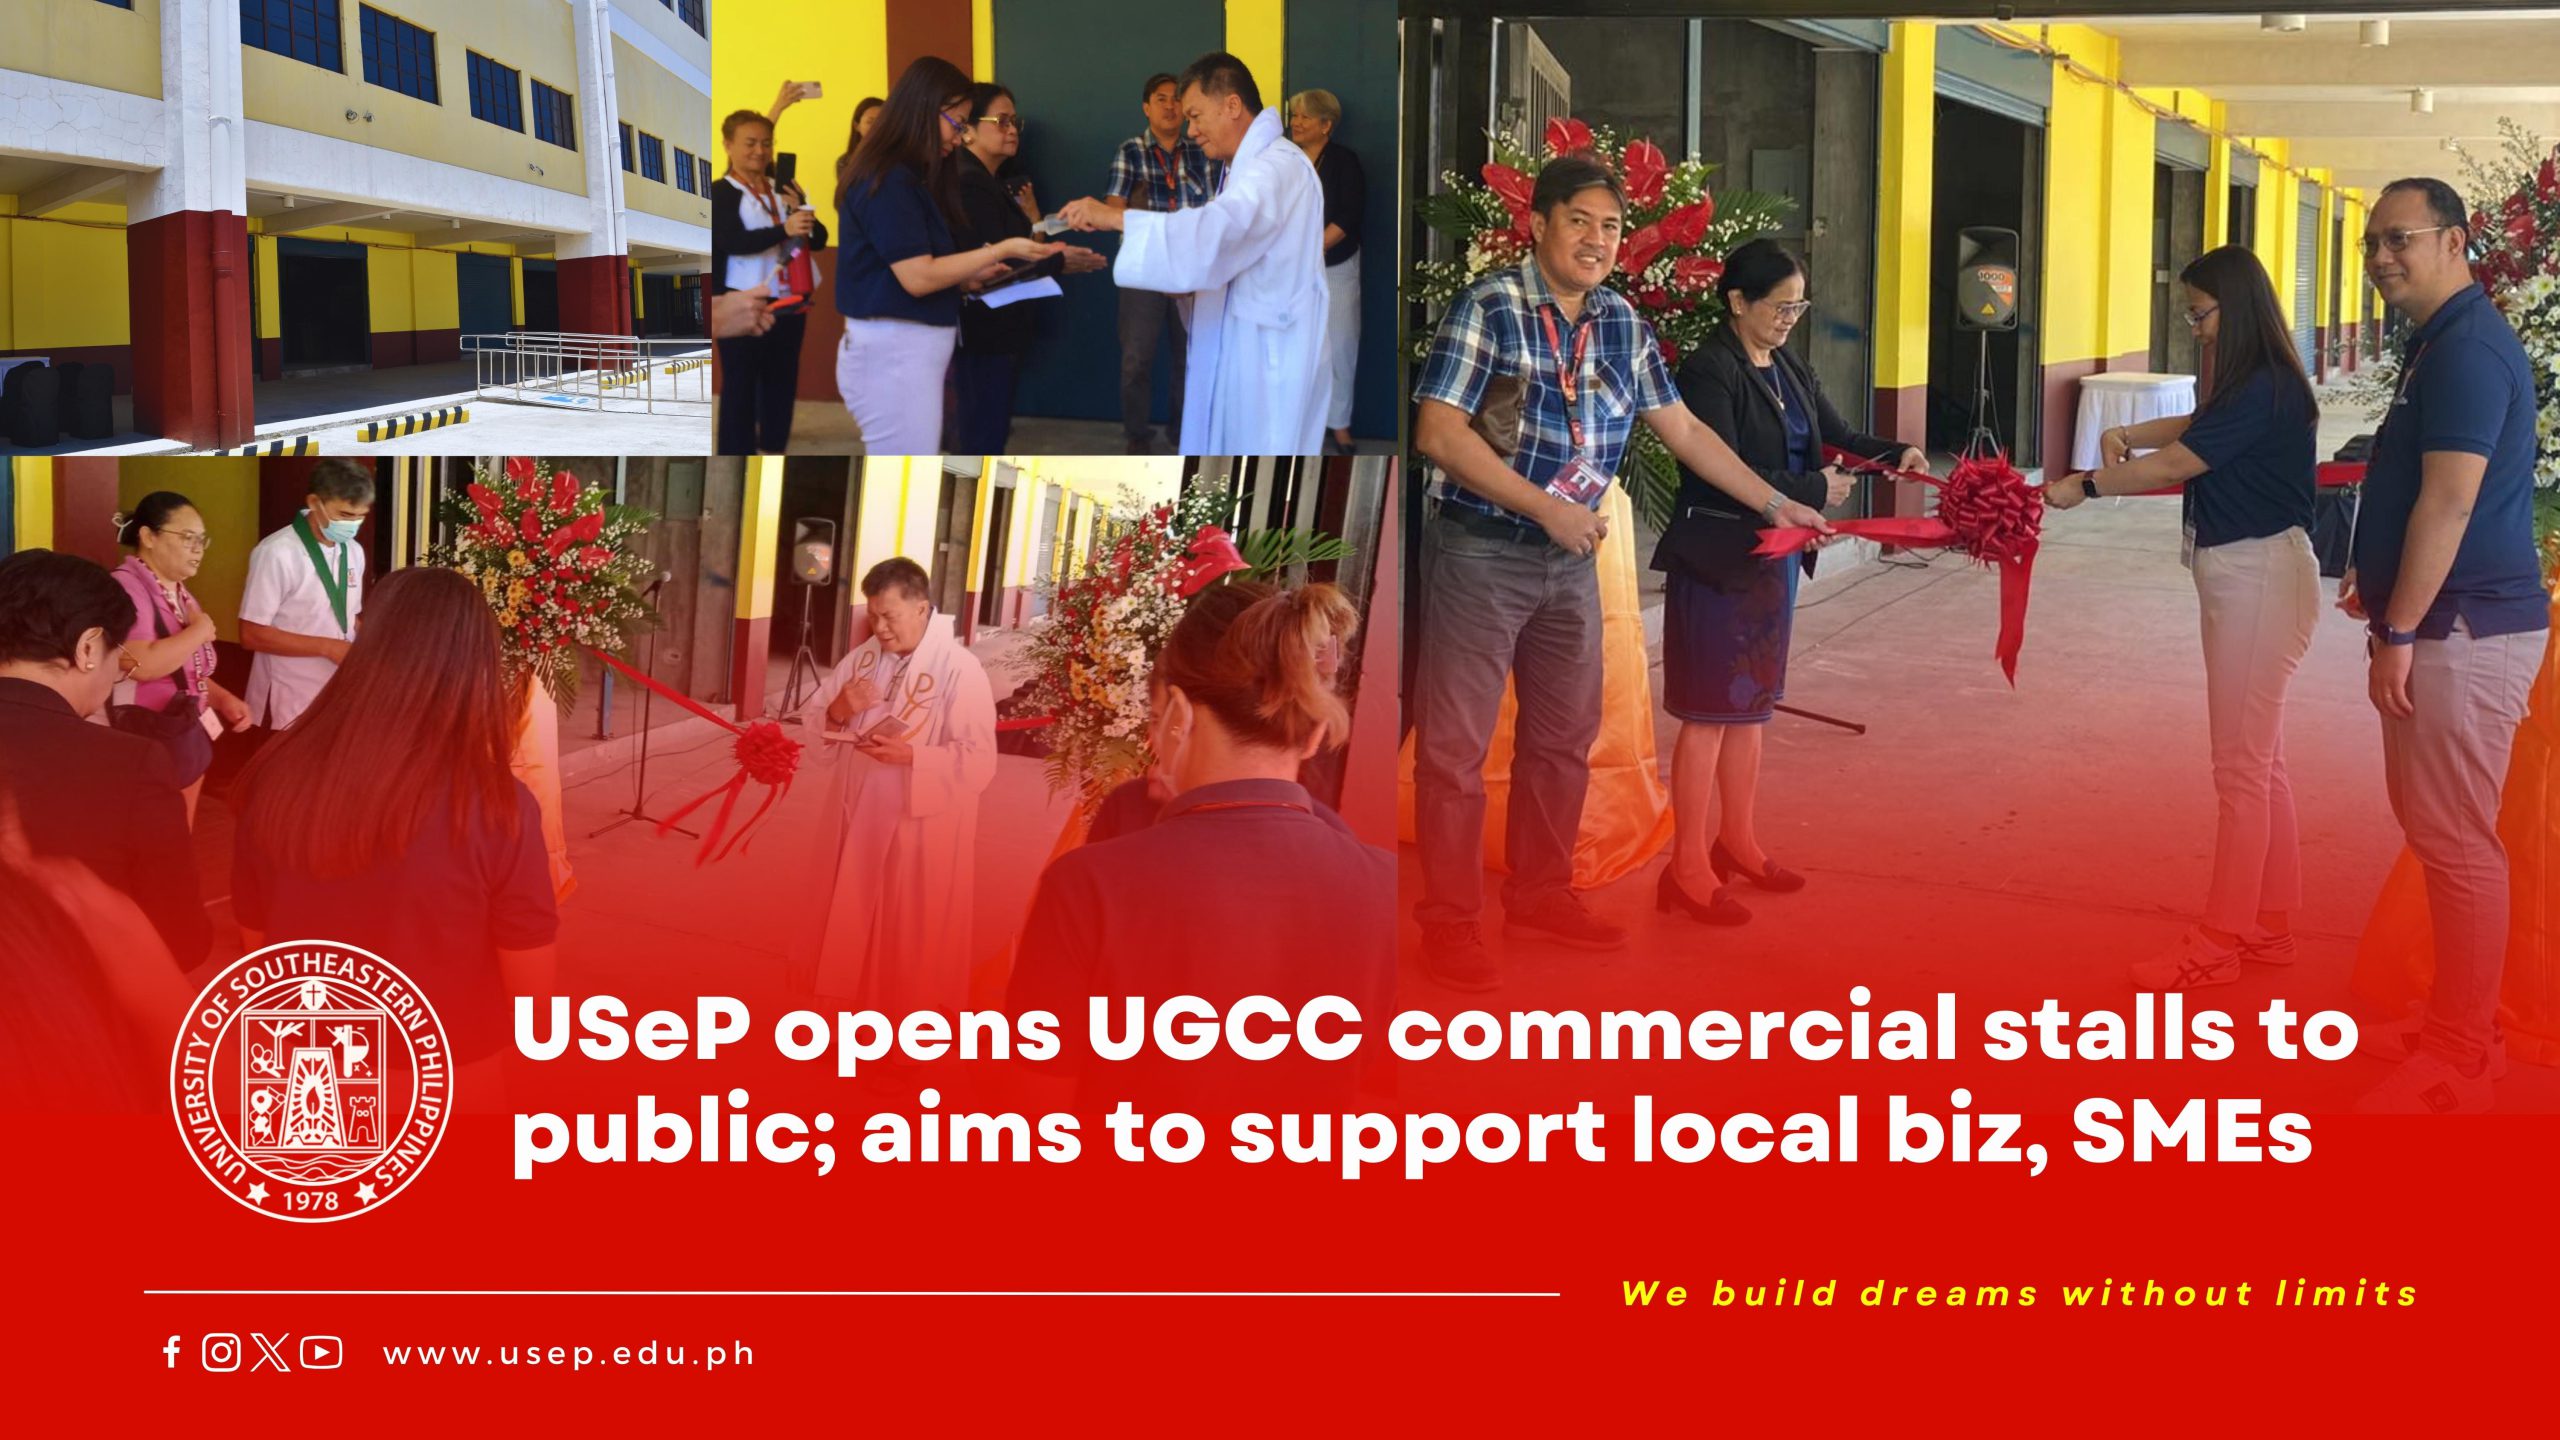 USeP opens UGCC commercial stalls to public; aims to support local biz, SMEs